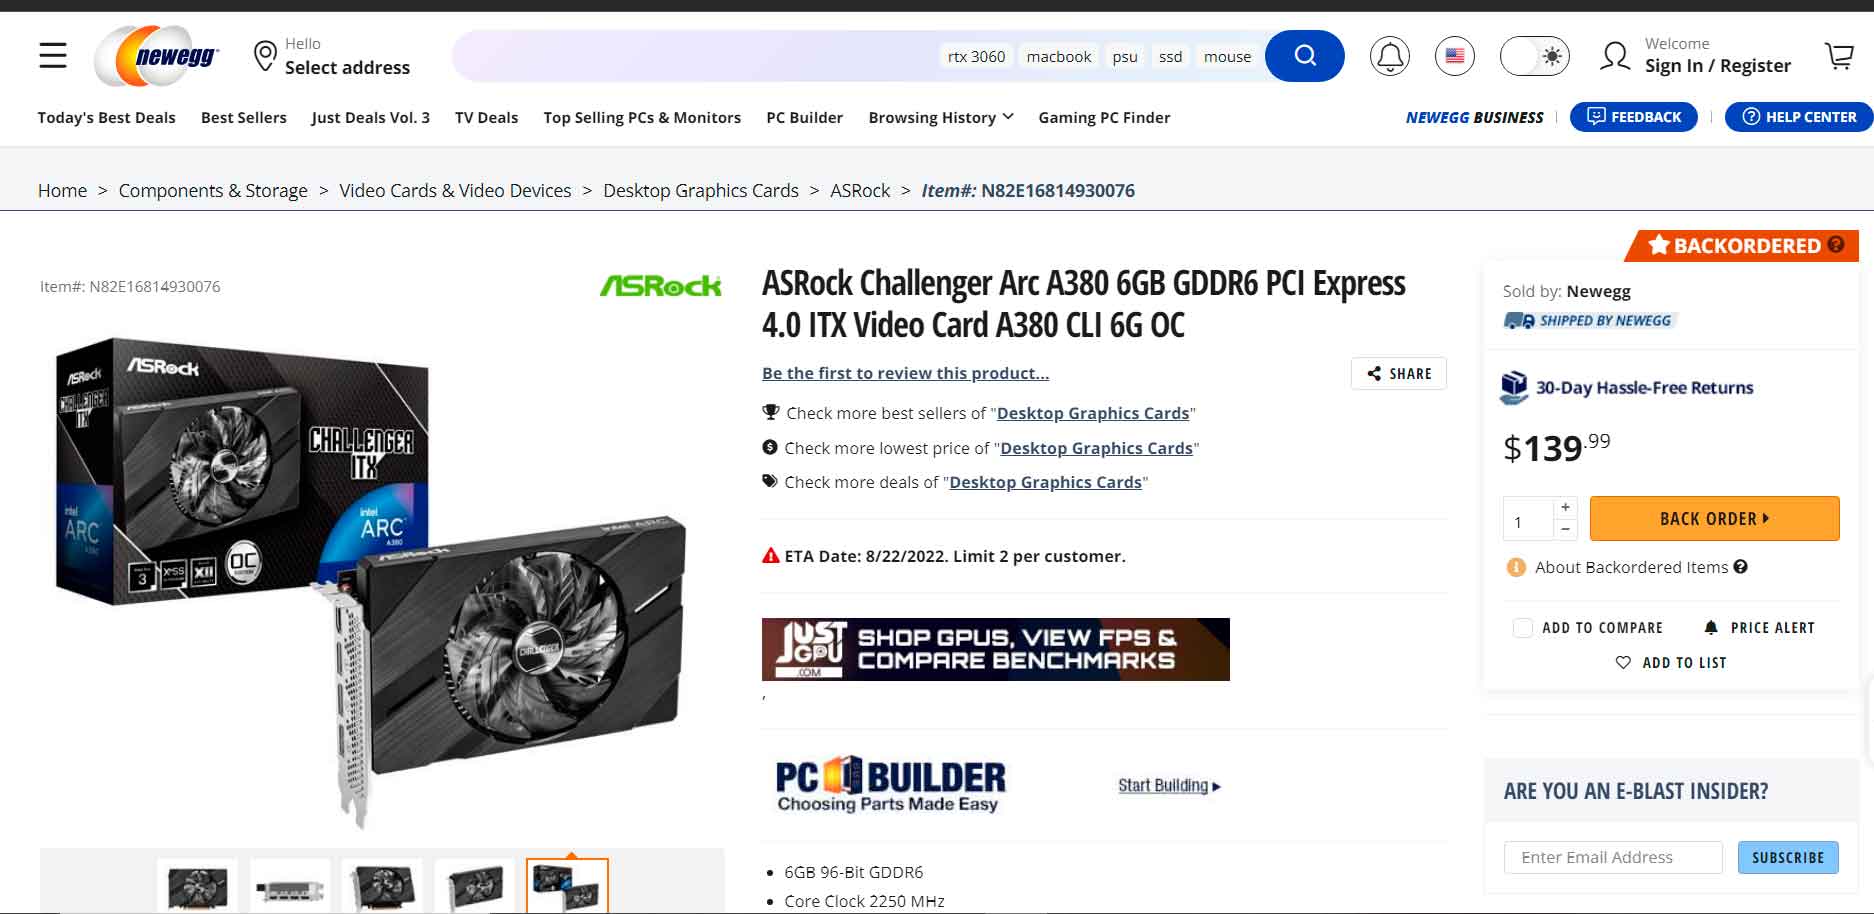 You can now reserve an Intel Arc A380 at Newegg